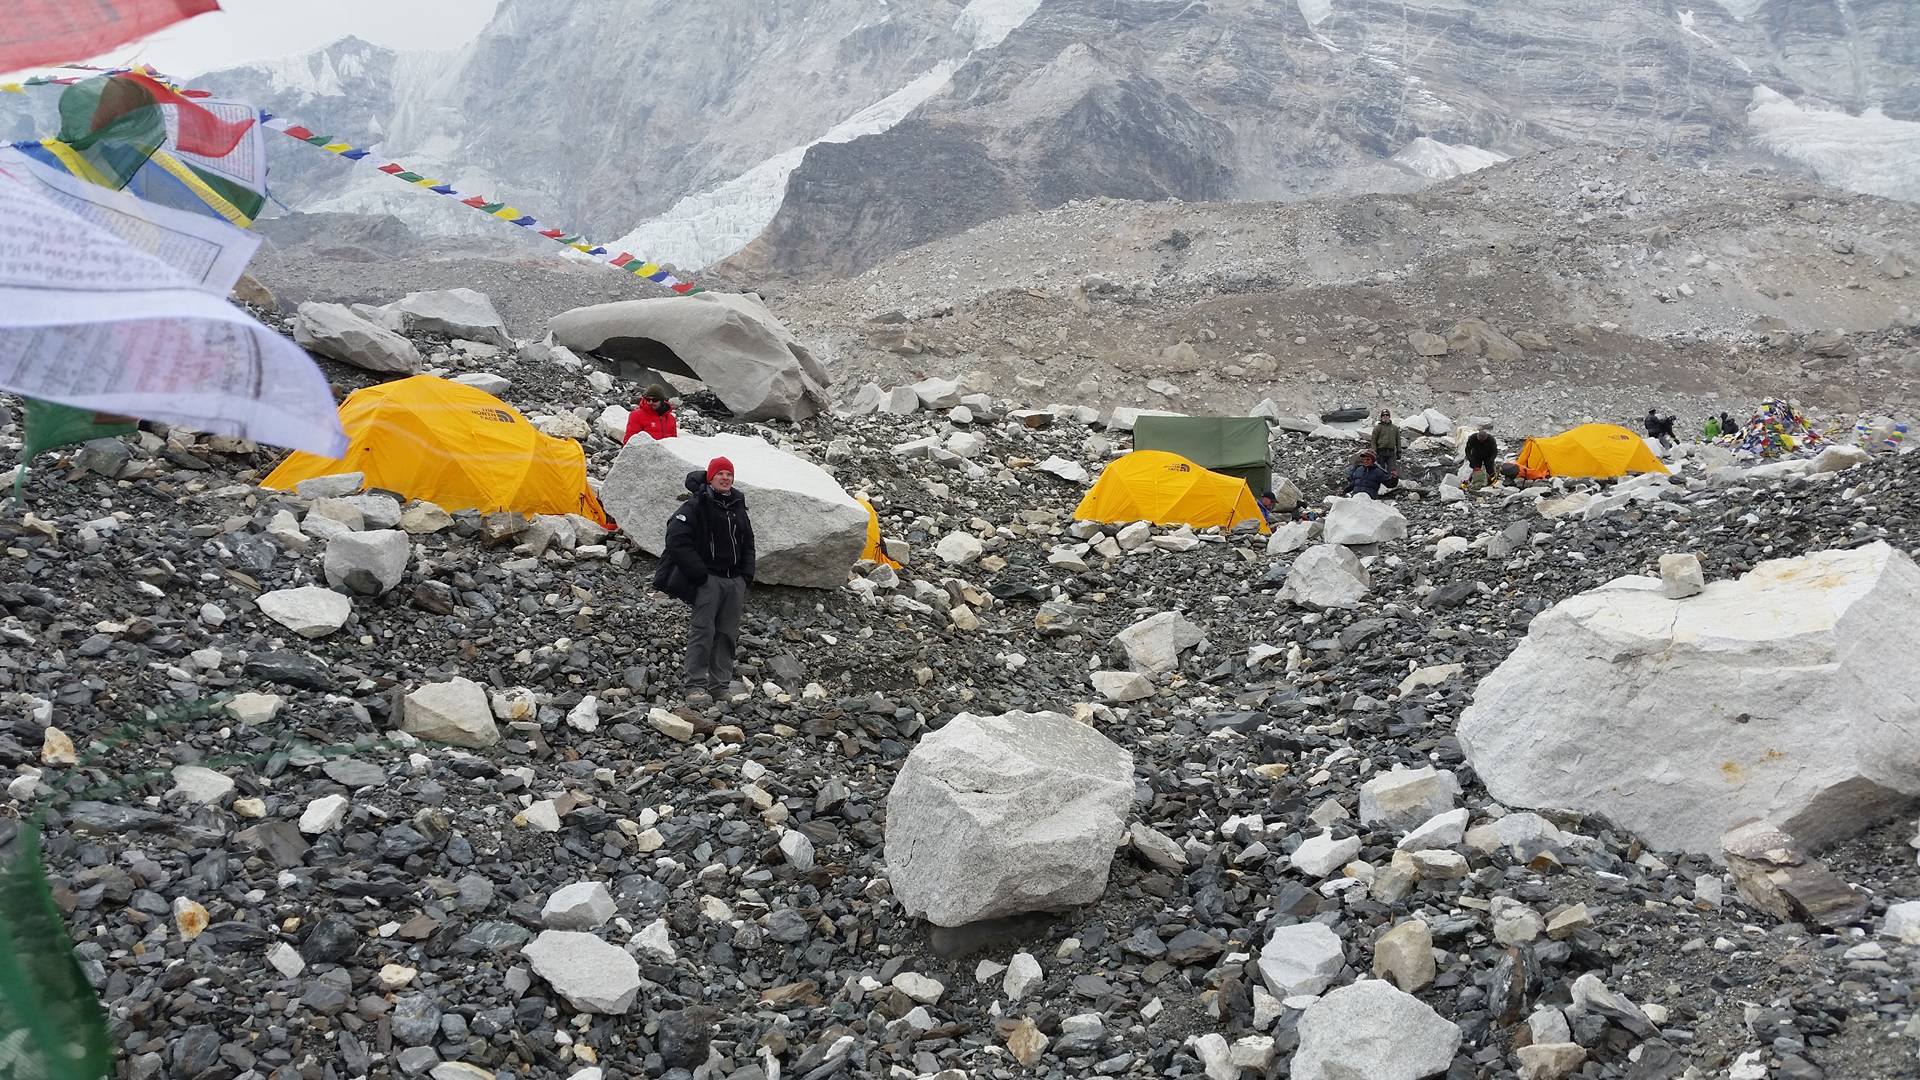 The scene from our camp in Everest base camp